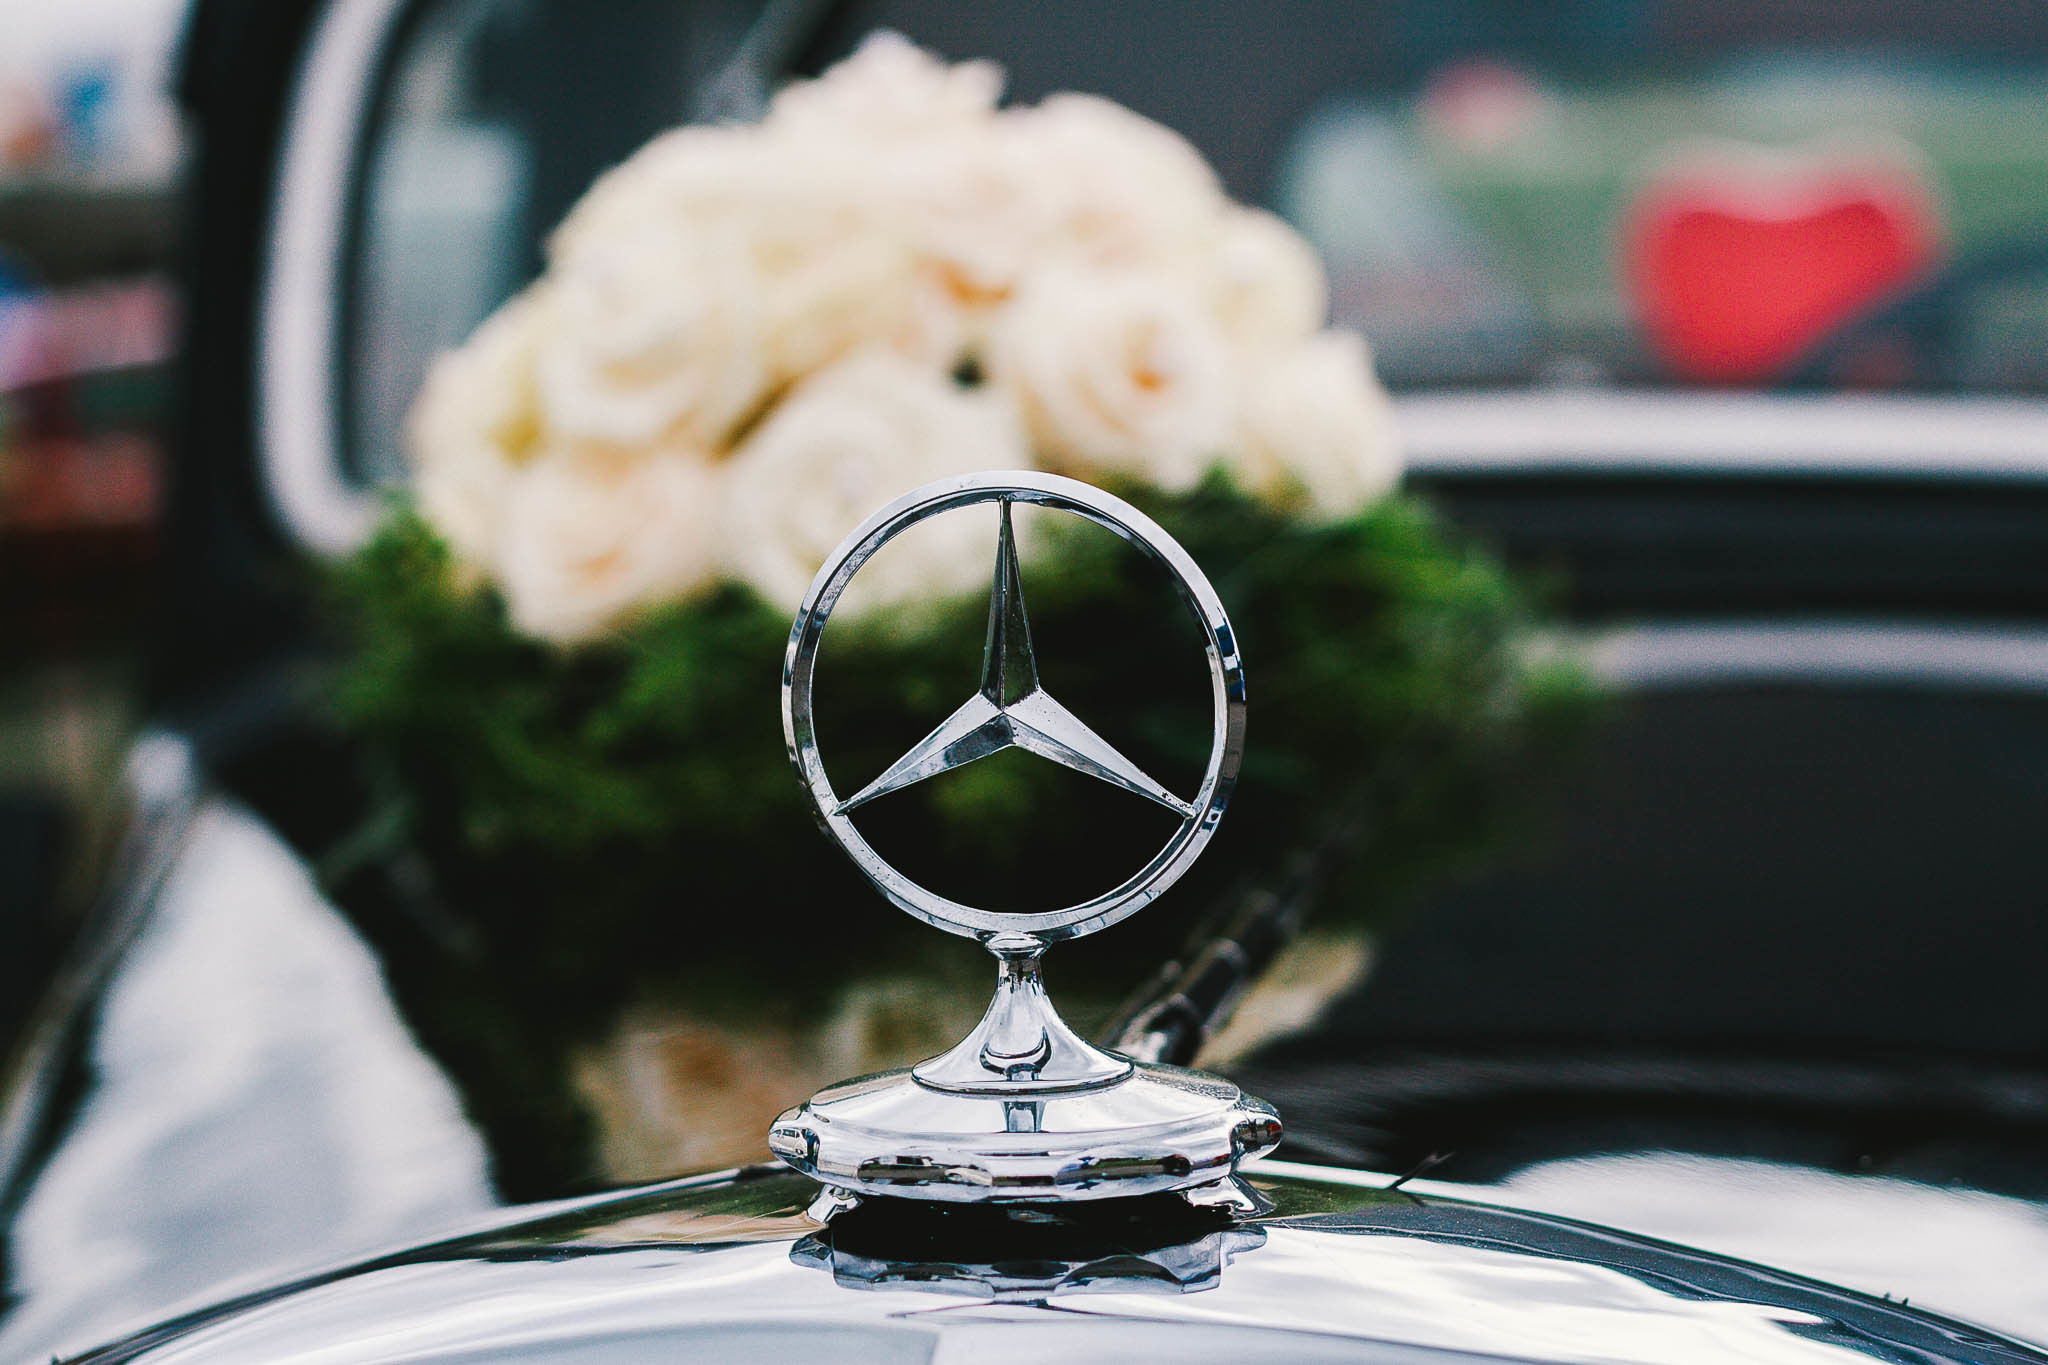 mercedes, flowers, cars, bouquet, icon, badge Aesthetic wallpaper